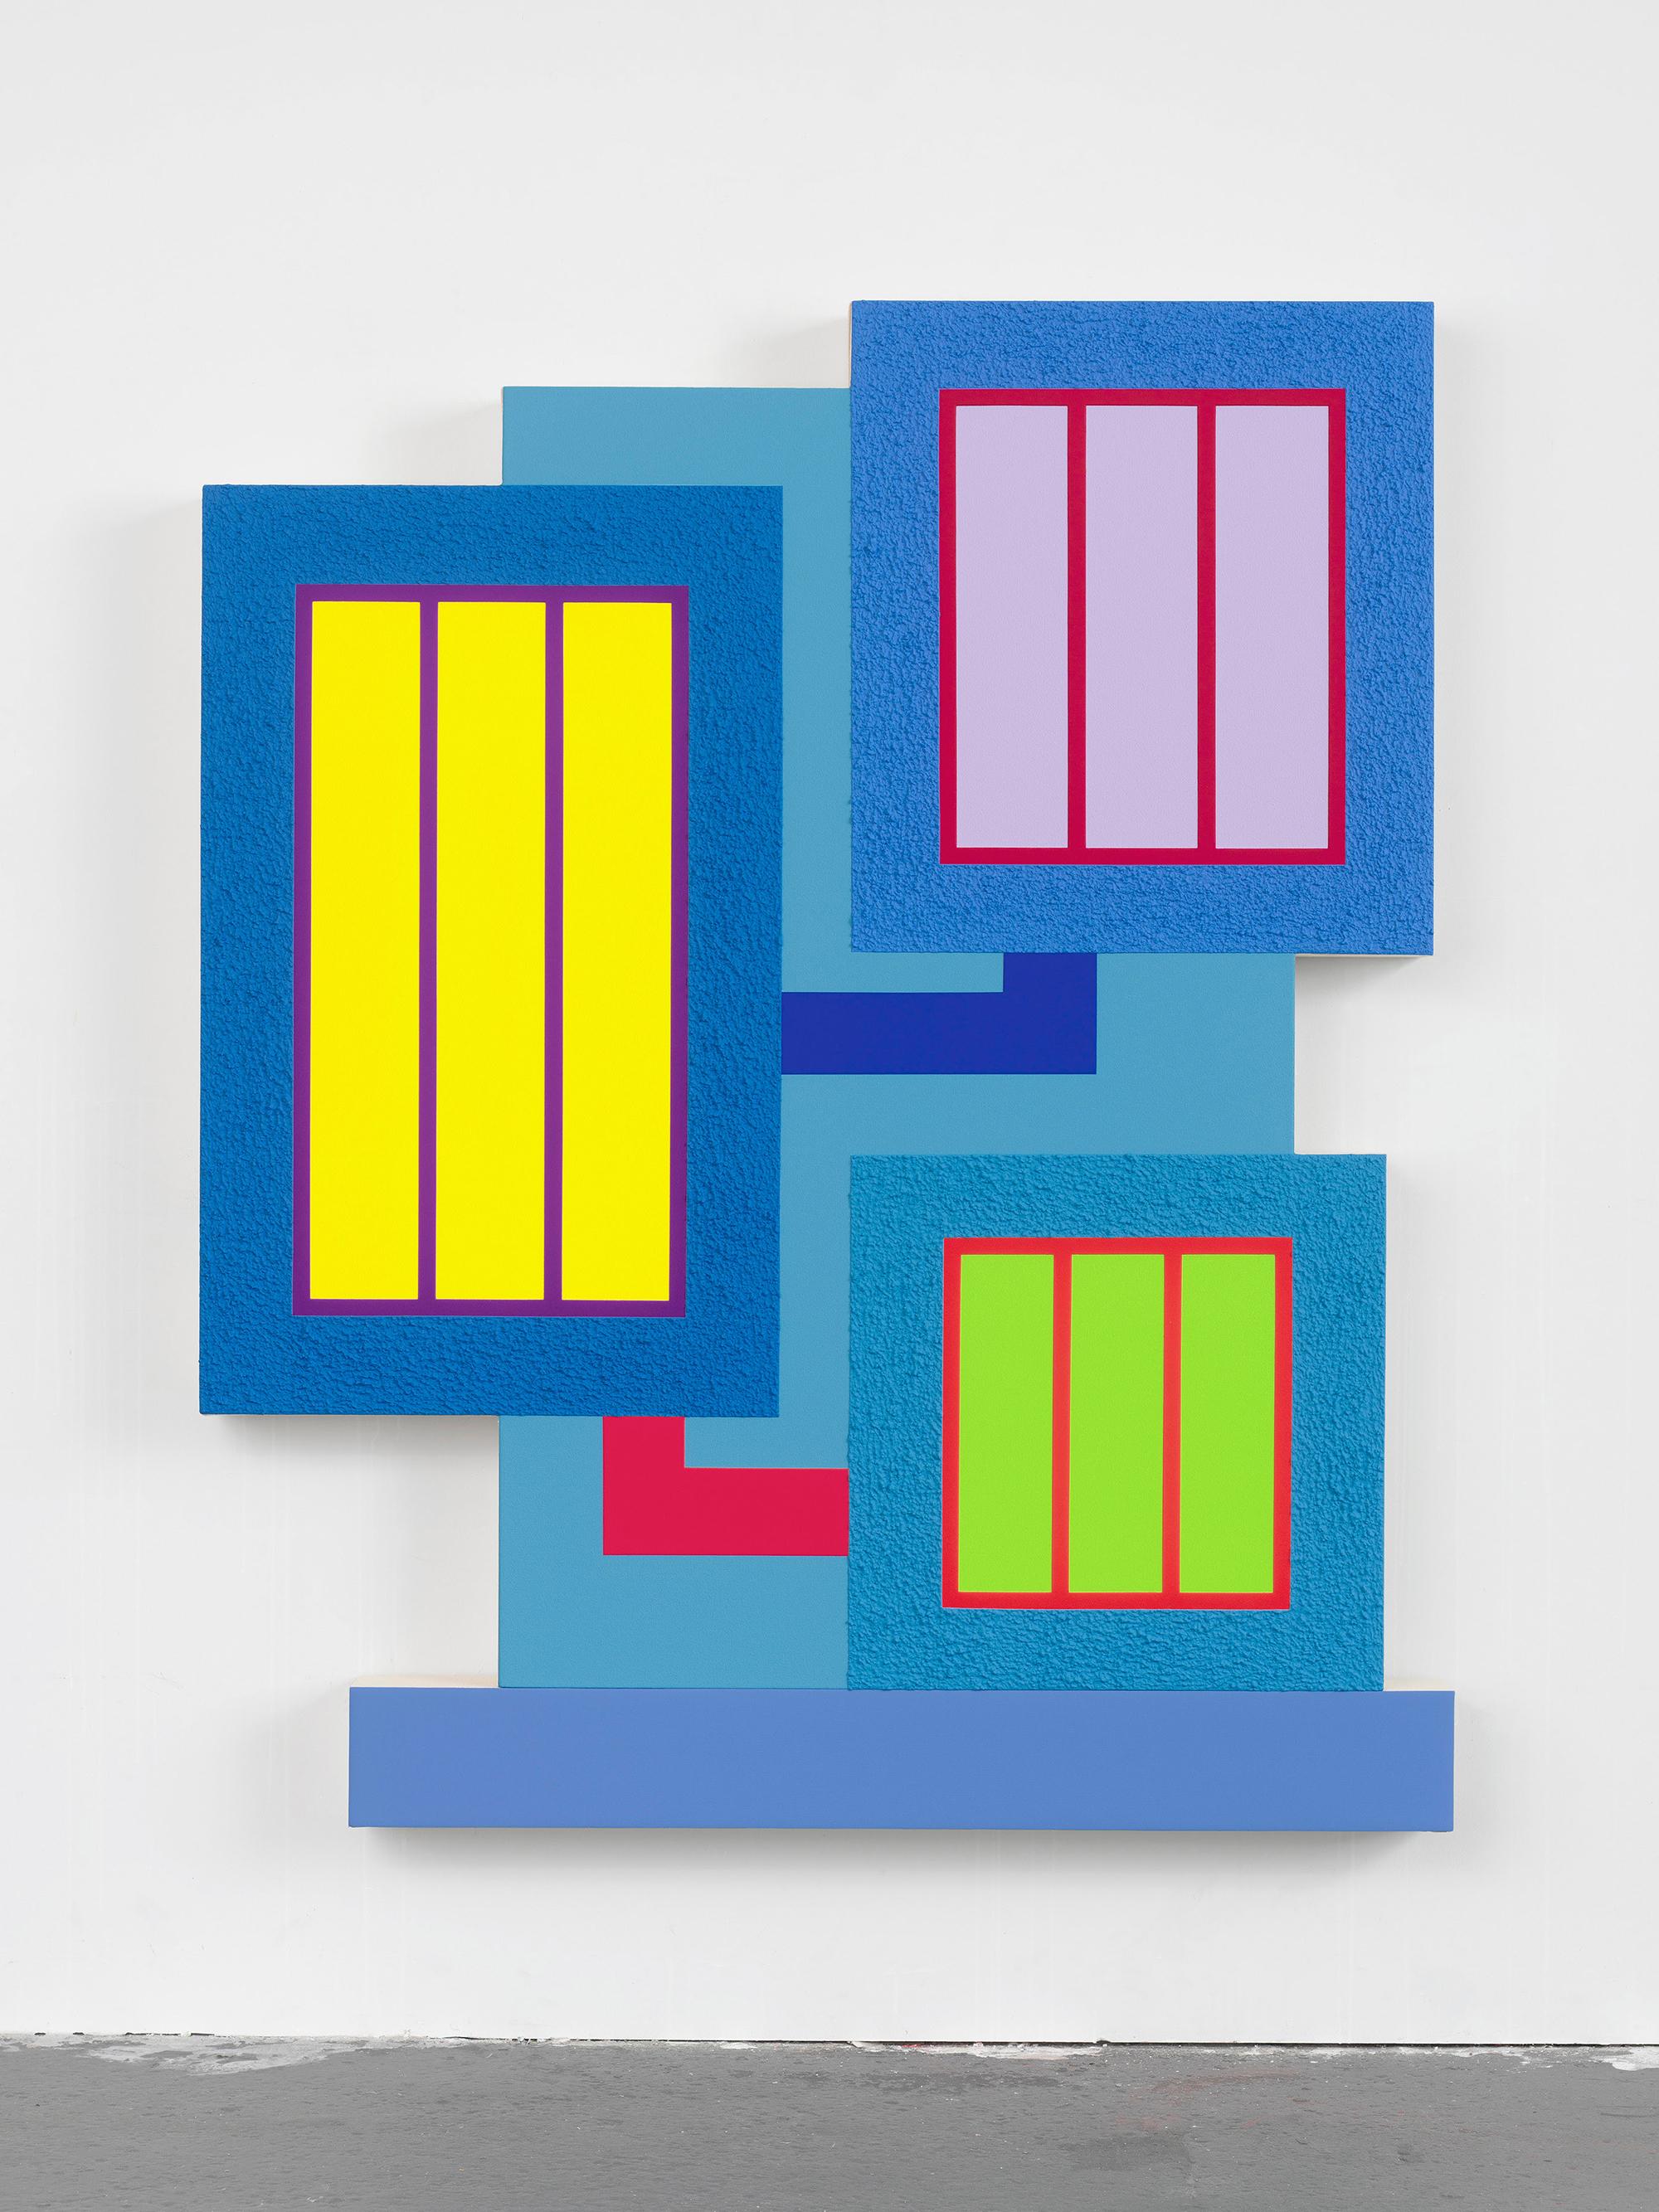 Halley's paintings explore both the physical and psychological structures of social space; he connects the hermetic language of geometric abstraction—influenced by artists such as Barnett Newman and Ellsworth Kelly—to the actualities of urban space